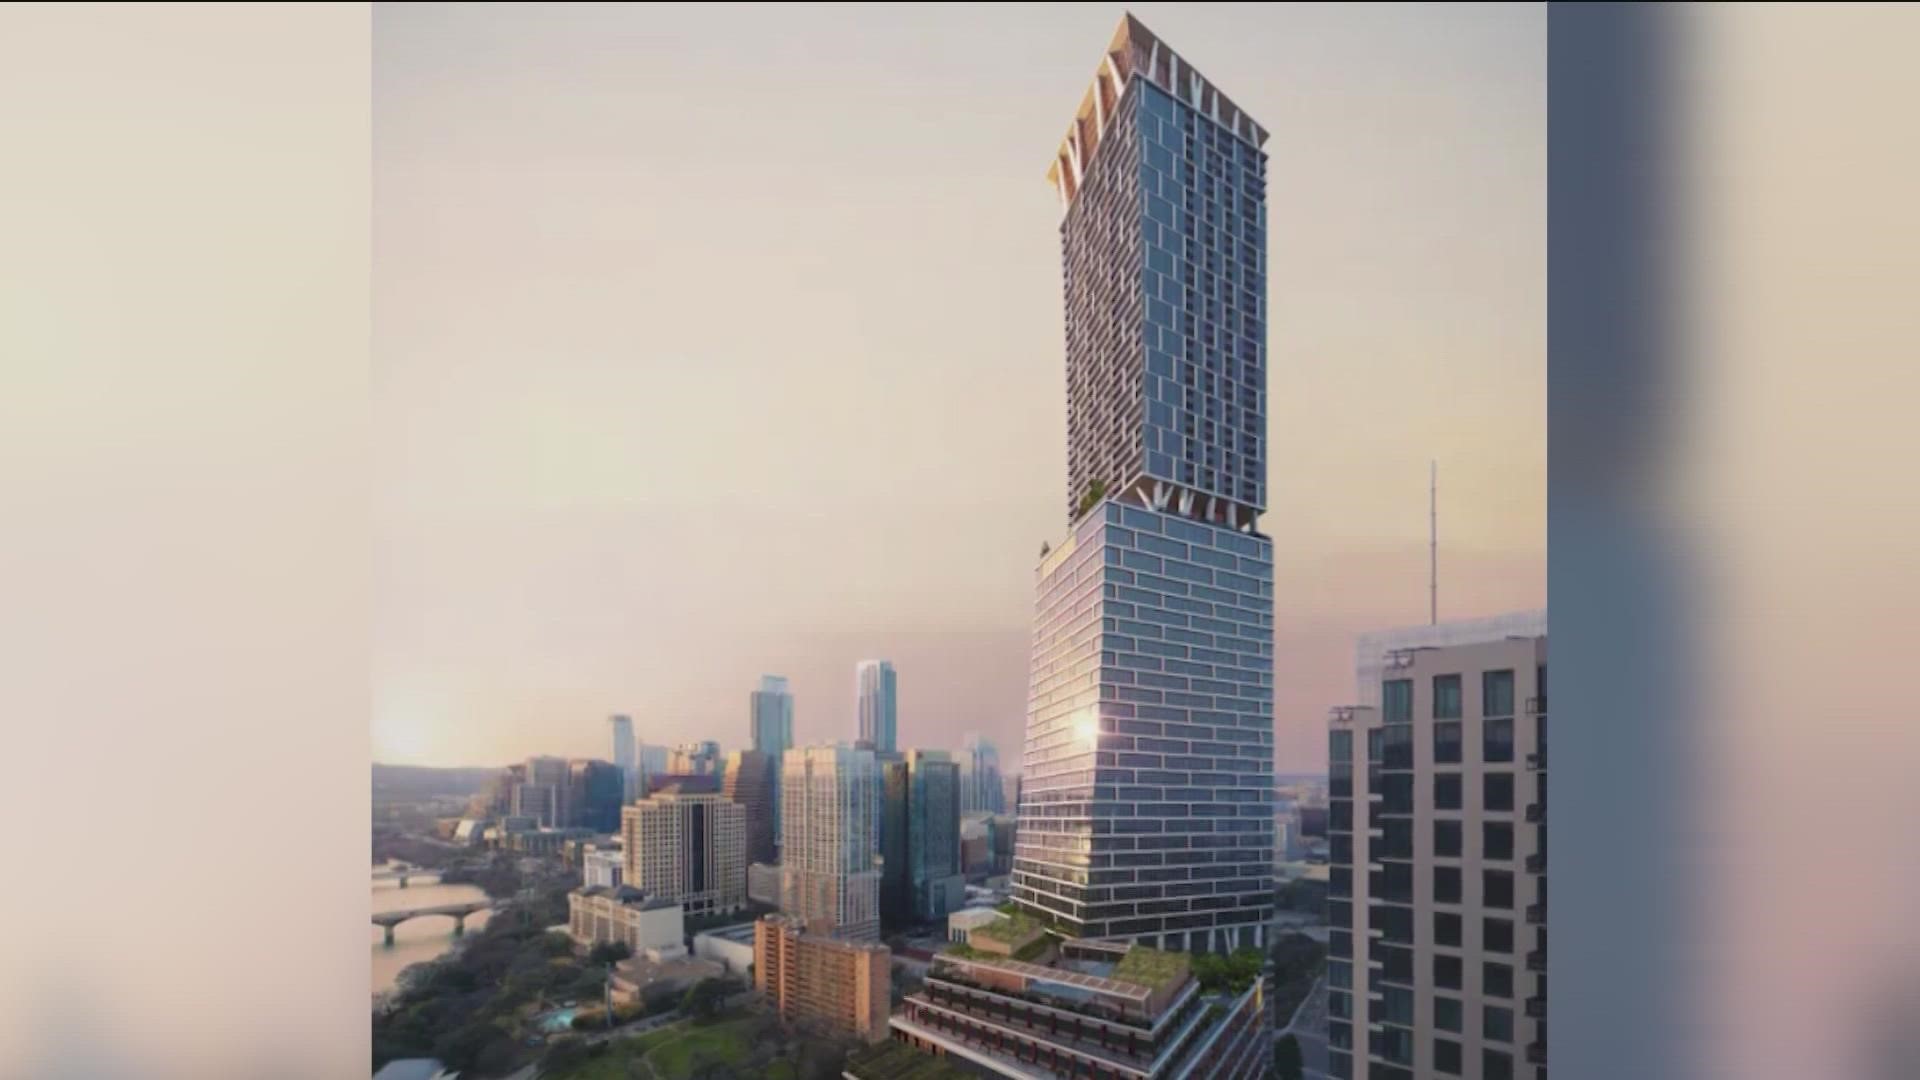 The Waterline tower is slated to become Austin's tallest skyscraper.